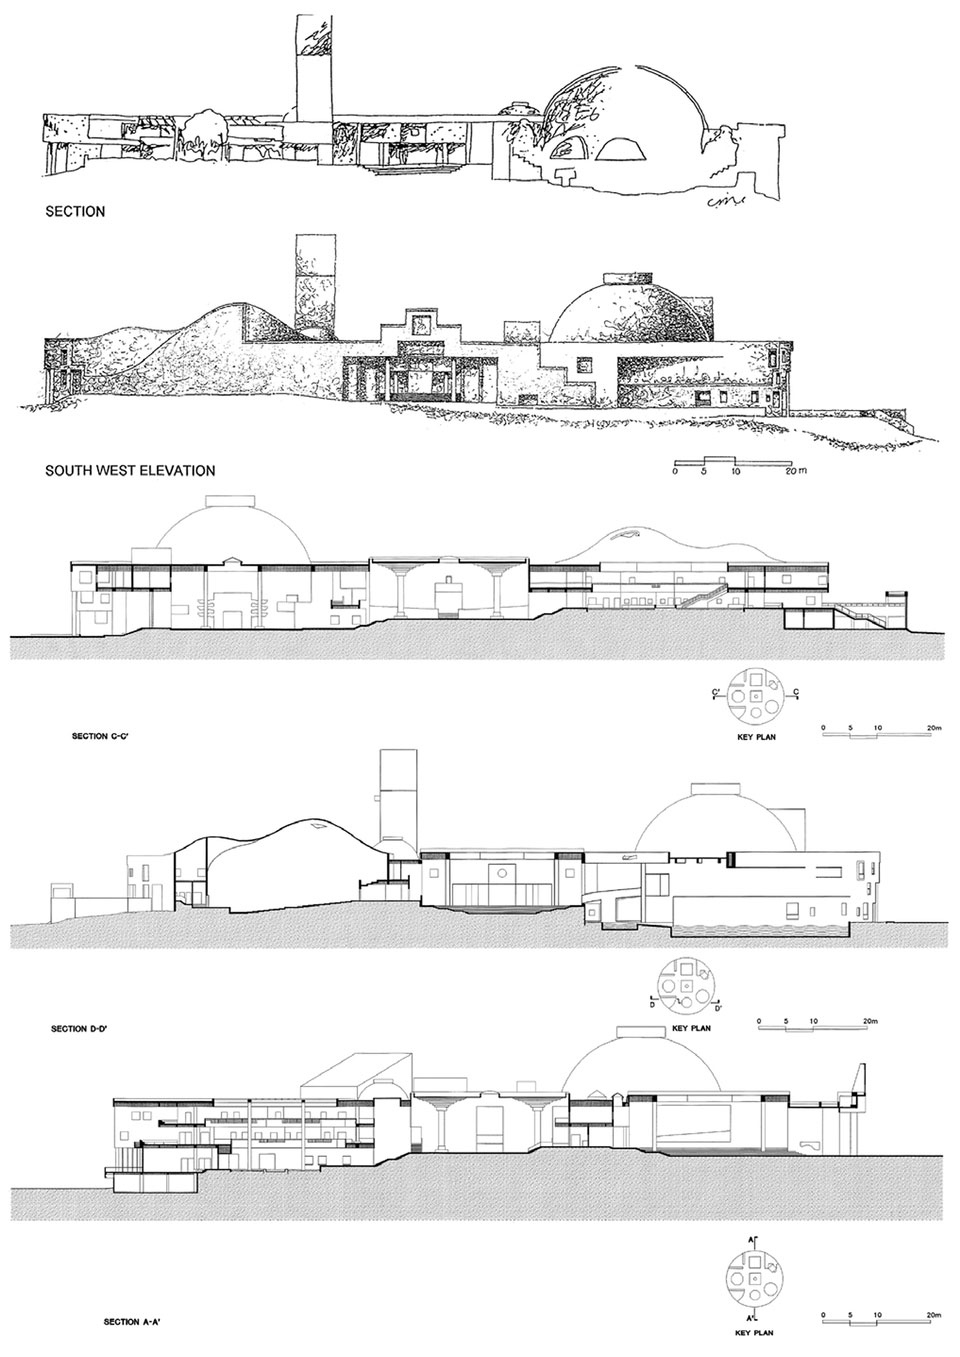 Elevations and Sections - Vidhan Bhavan State Assembly in Bhopal / Charles Correa